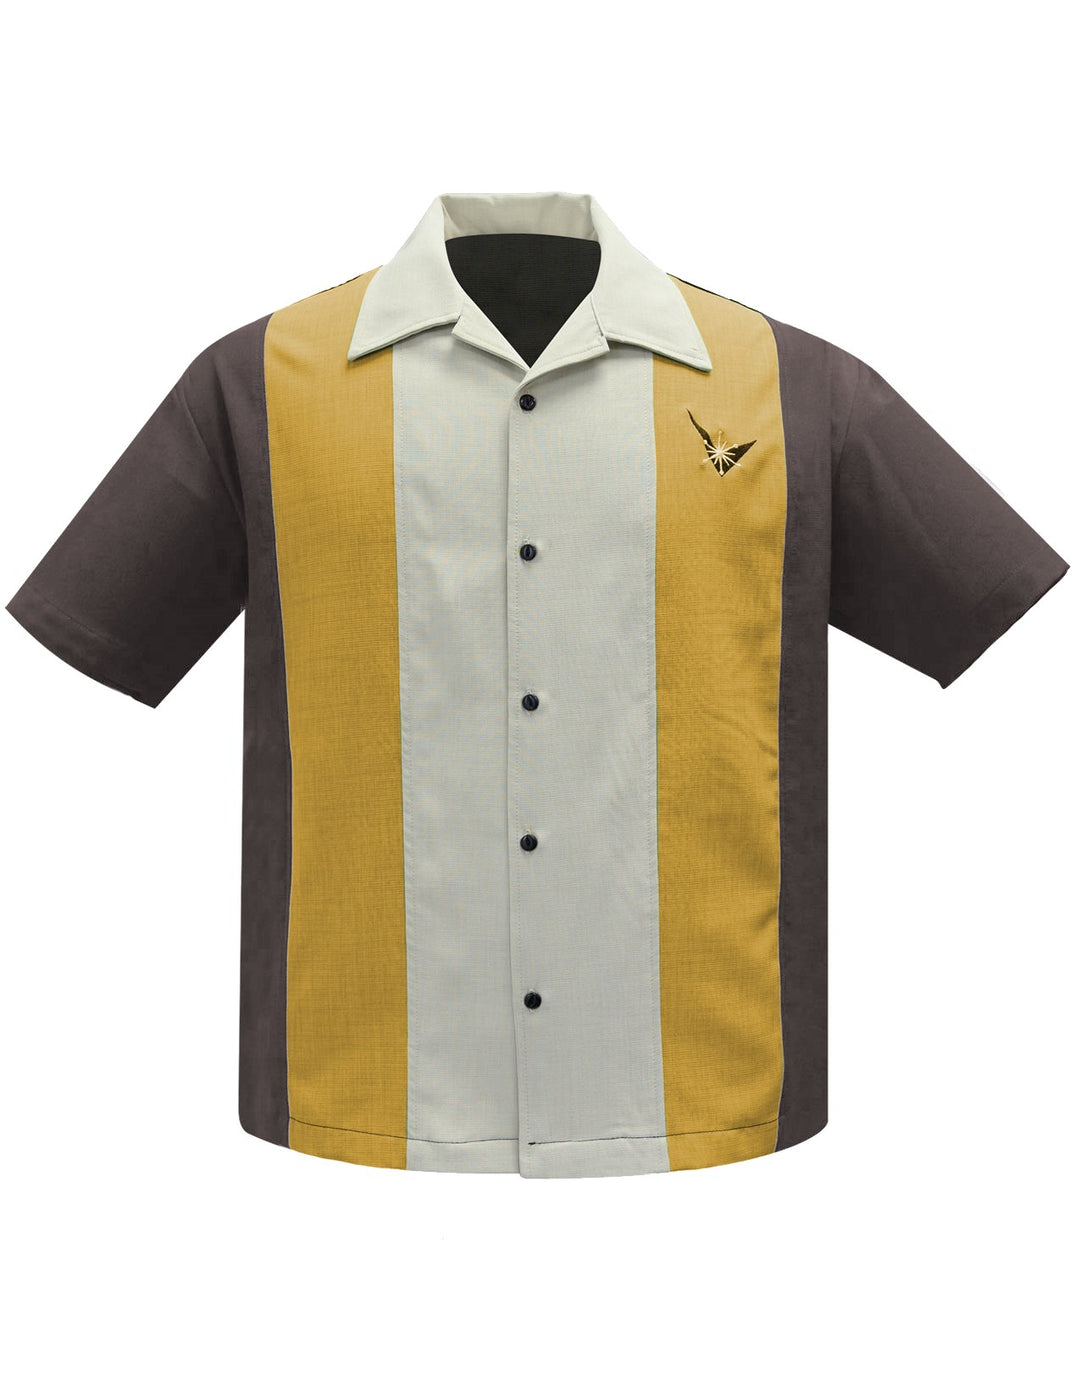 Atomic Mad Men Bowling Shirt in Coffee by Steady Clothing